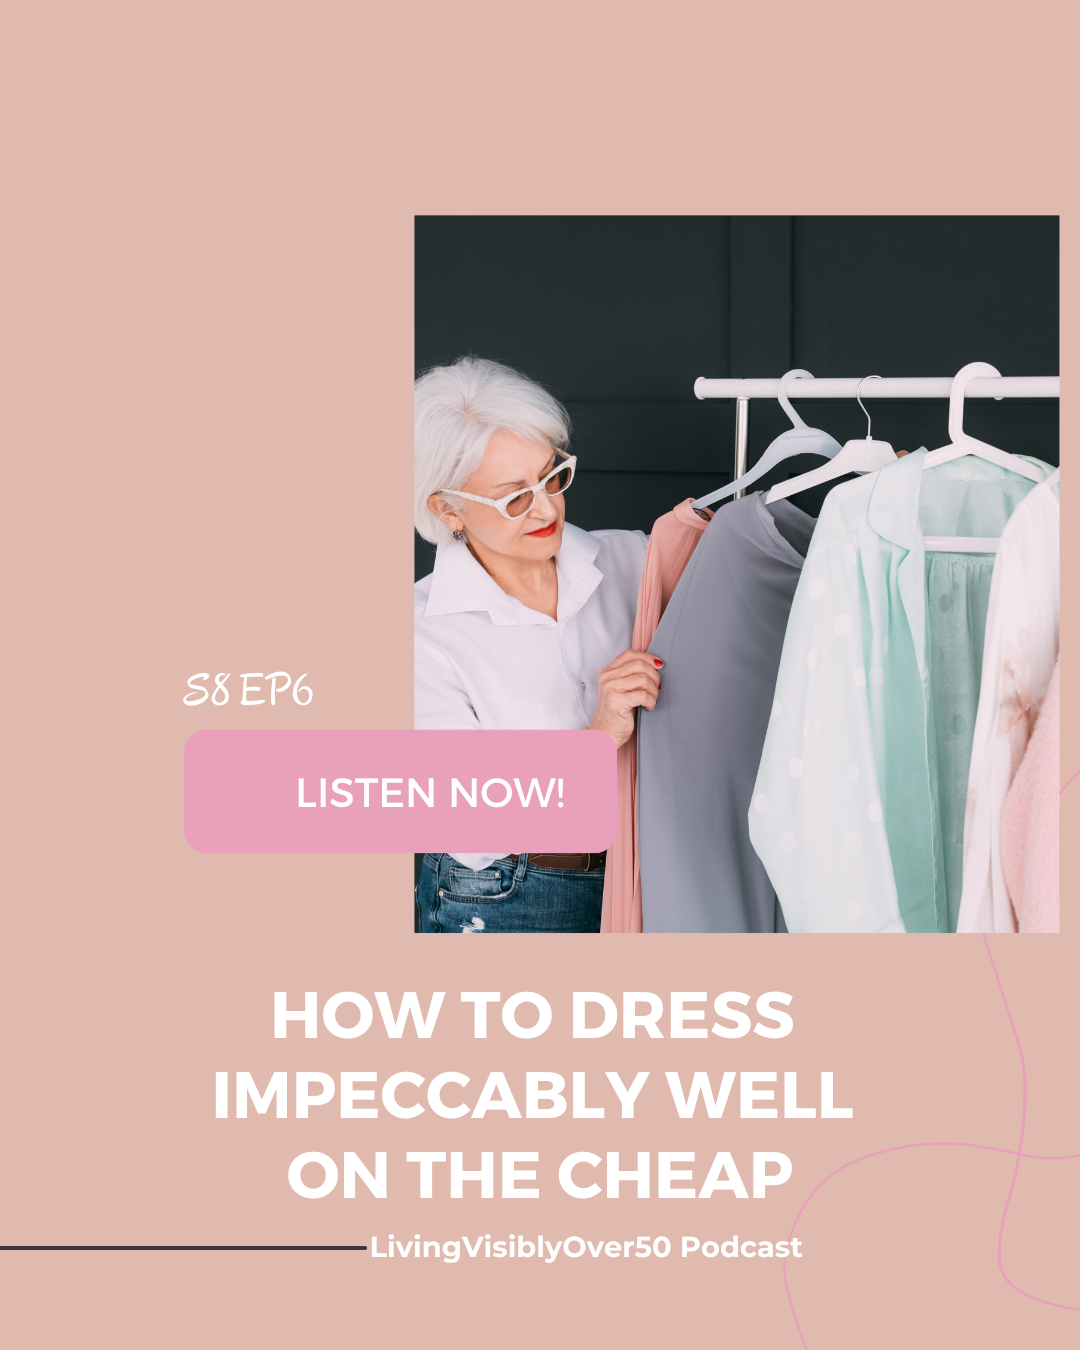 Living Visibly Over 50 podcast. How To Dress Impeccably Well On The Cheap.